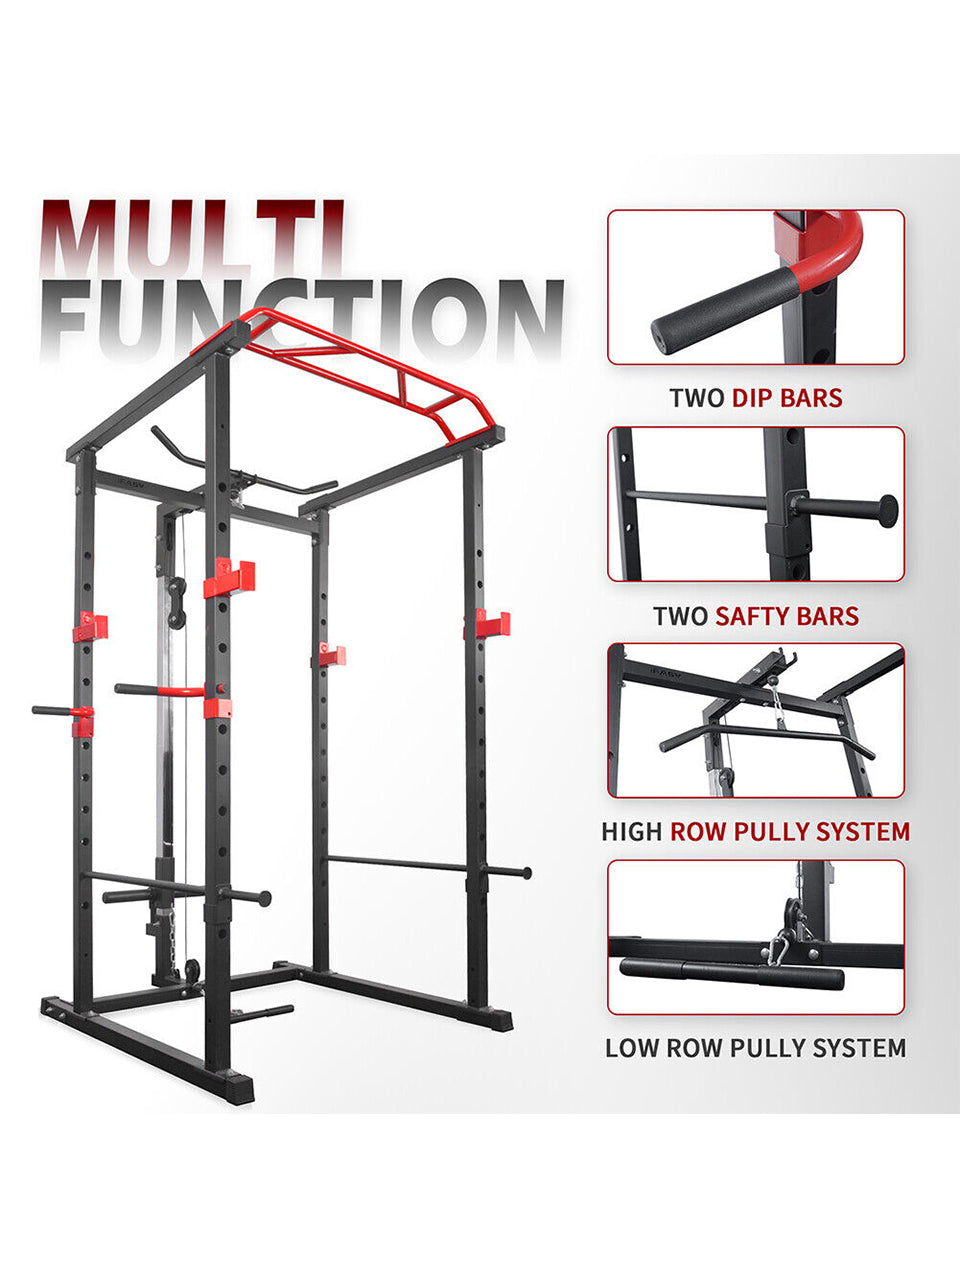 1441 Fitness Heavy Duty Squat Rack & Power Cage with Pull Up Bar J008 - Grey Color Frame